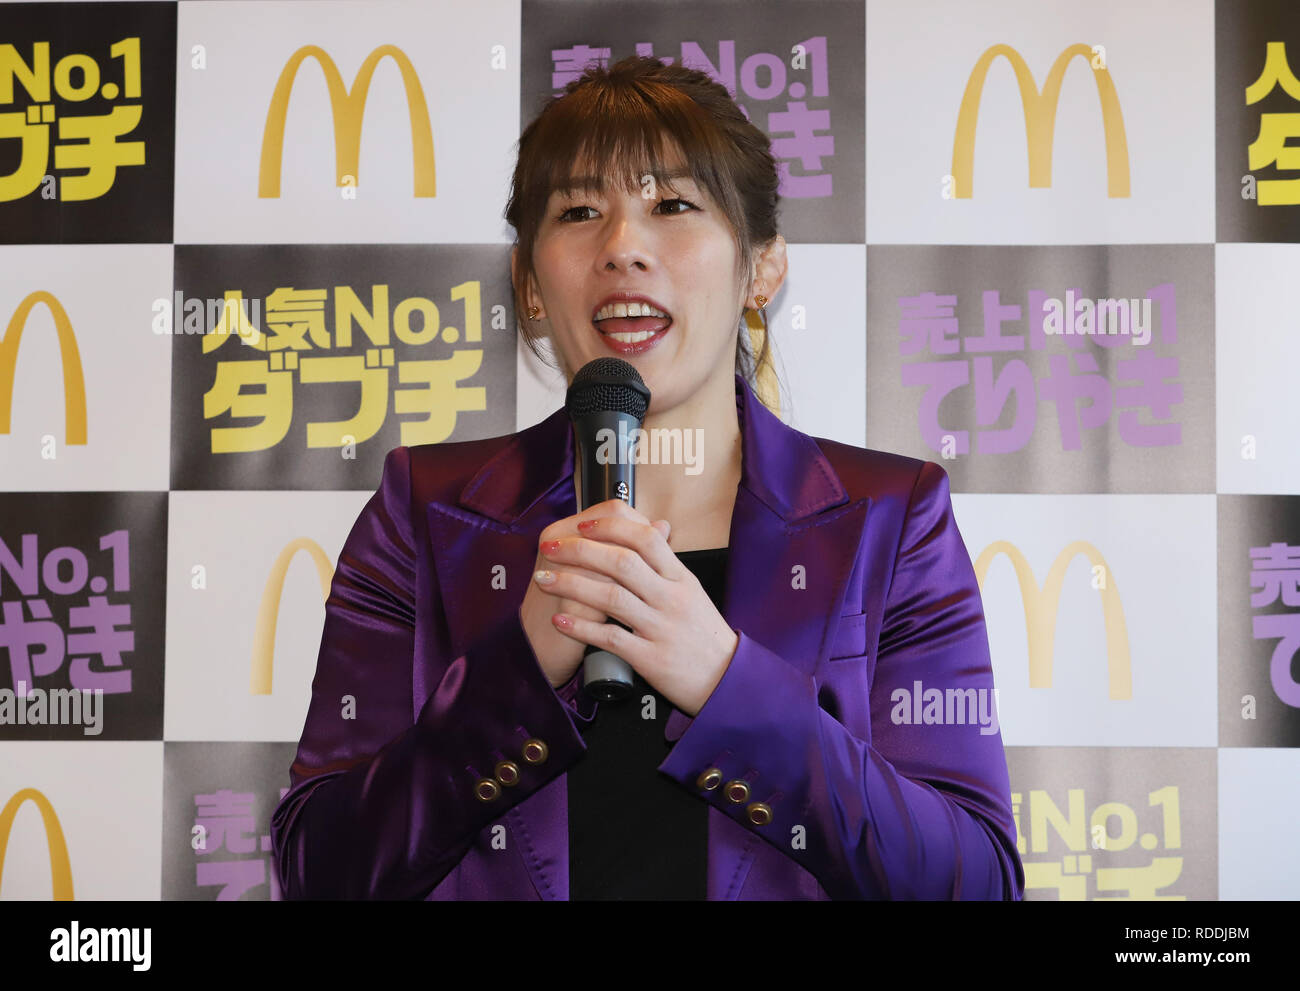 January 18, 2019, Tokyo, Japan - Three times Olympic wrestling gold medalist Saori Yoshida speaks as she acts as CEO-for-a-day of McDonald's restaurant chain at a McDonald's restaurant in Tokyo on Friday, January 18, 2019. Yoshida attended her first comercial event after she announced reirement from wrestling career last week.   (Photo by Yoshio Tsunoda/AFLO) Stock Photo